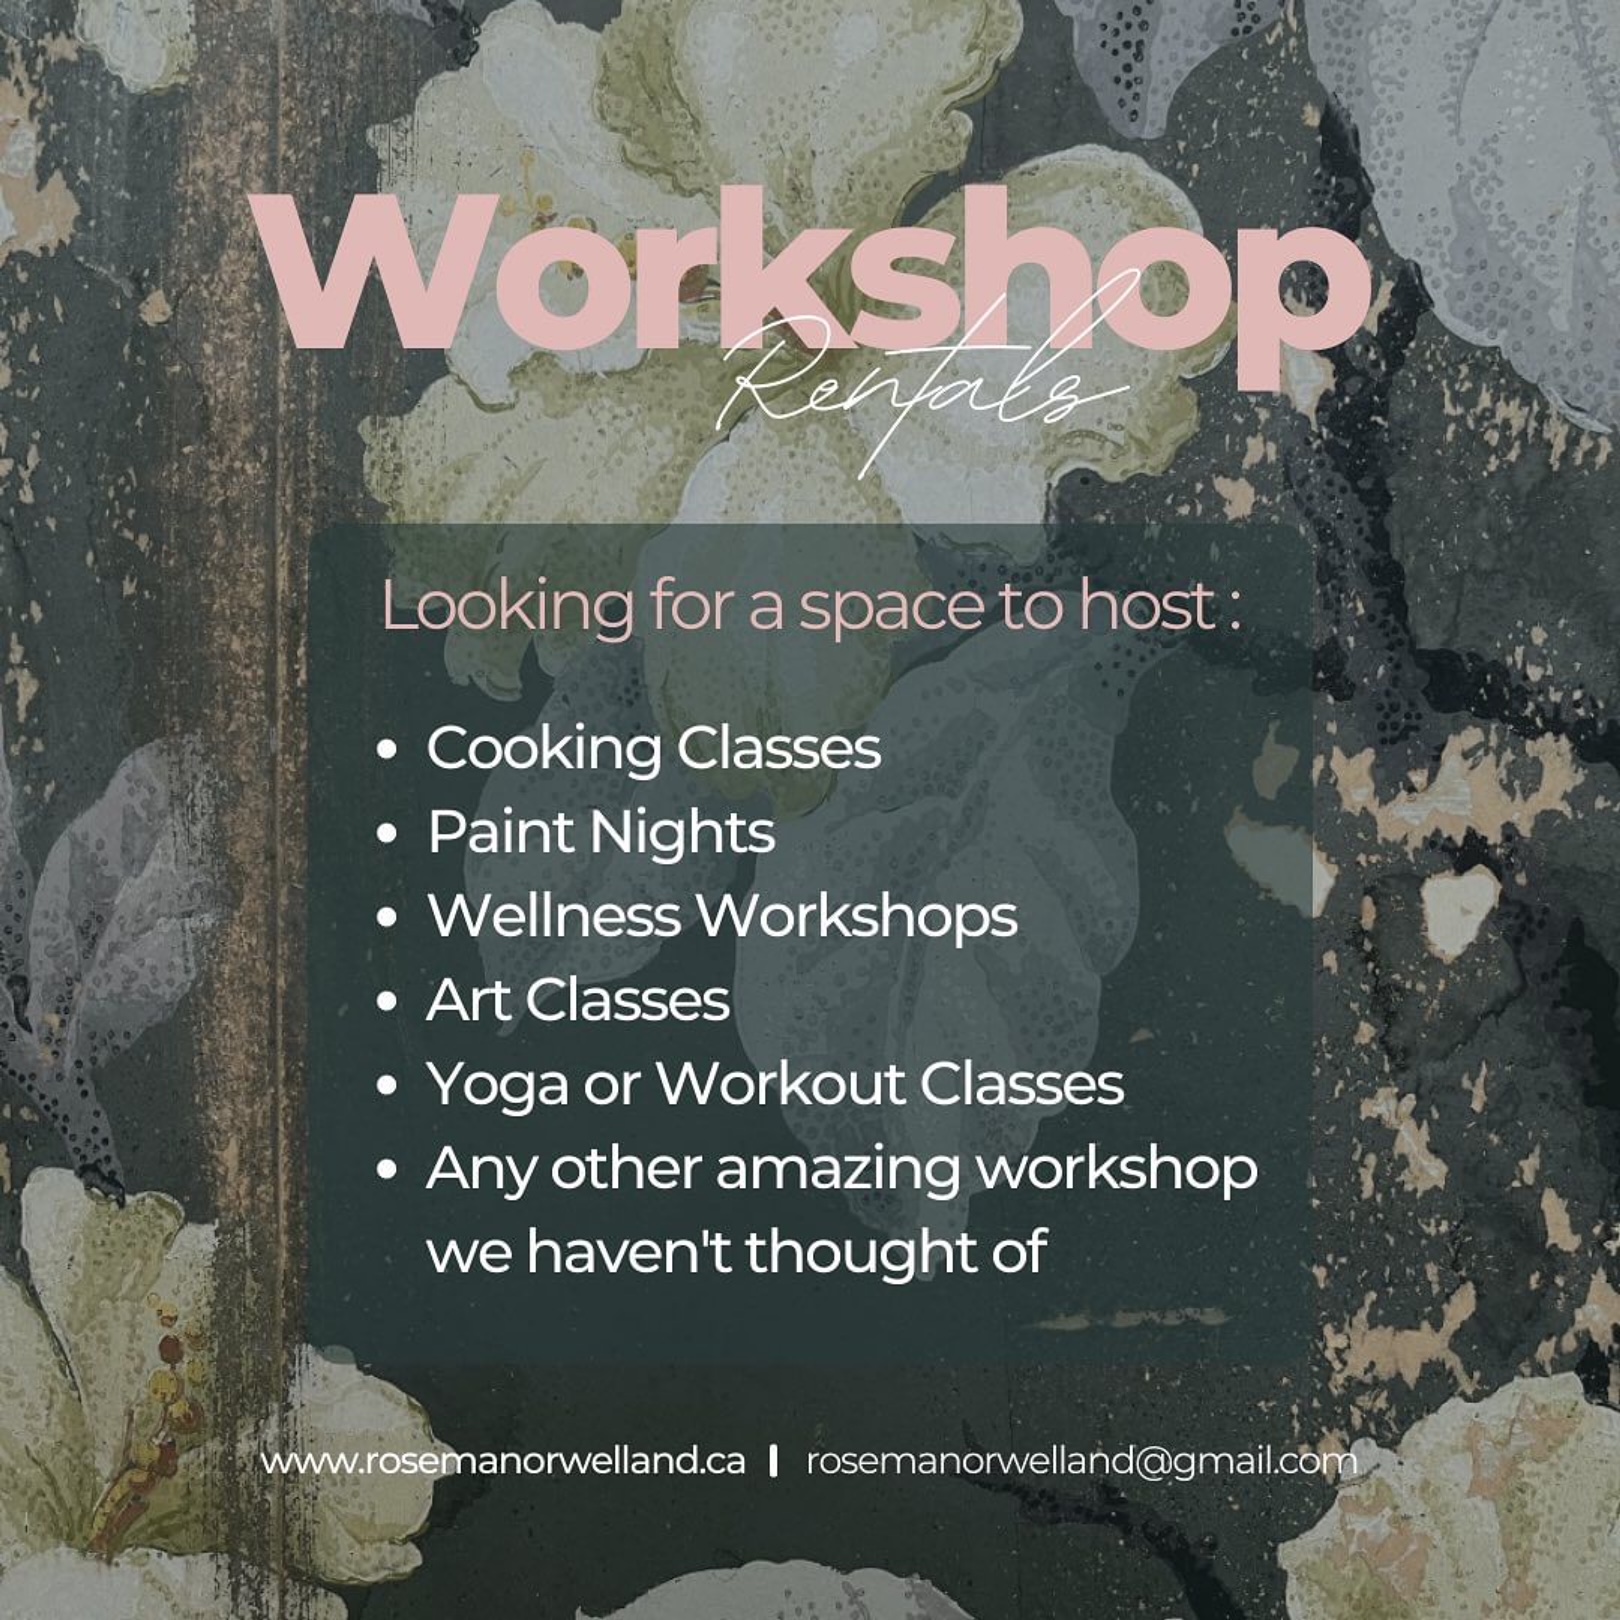 Rose Manor Welland – Workshop Venue For All Your Passions!